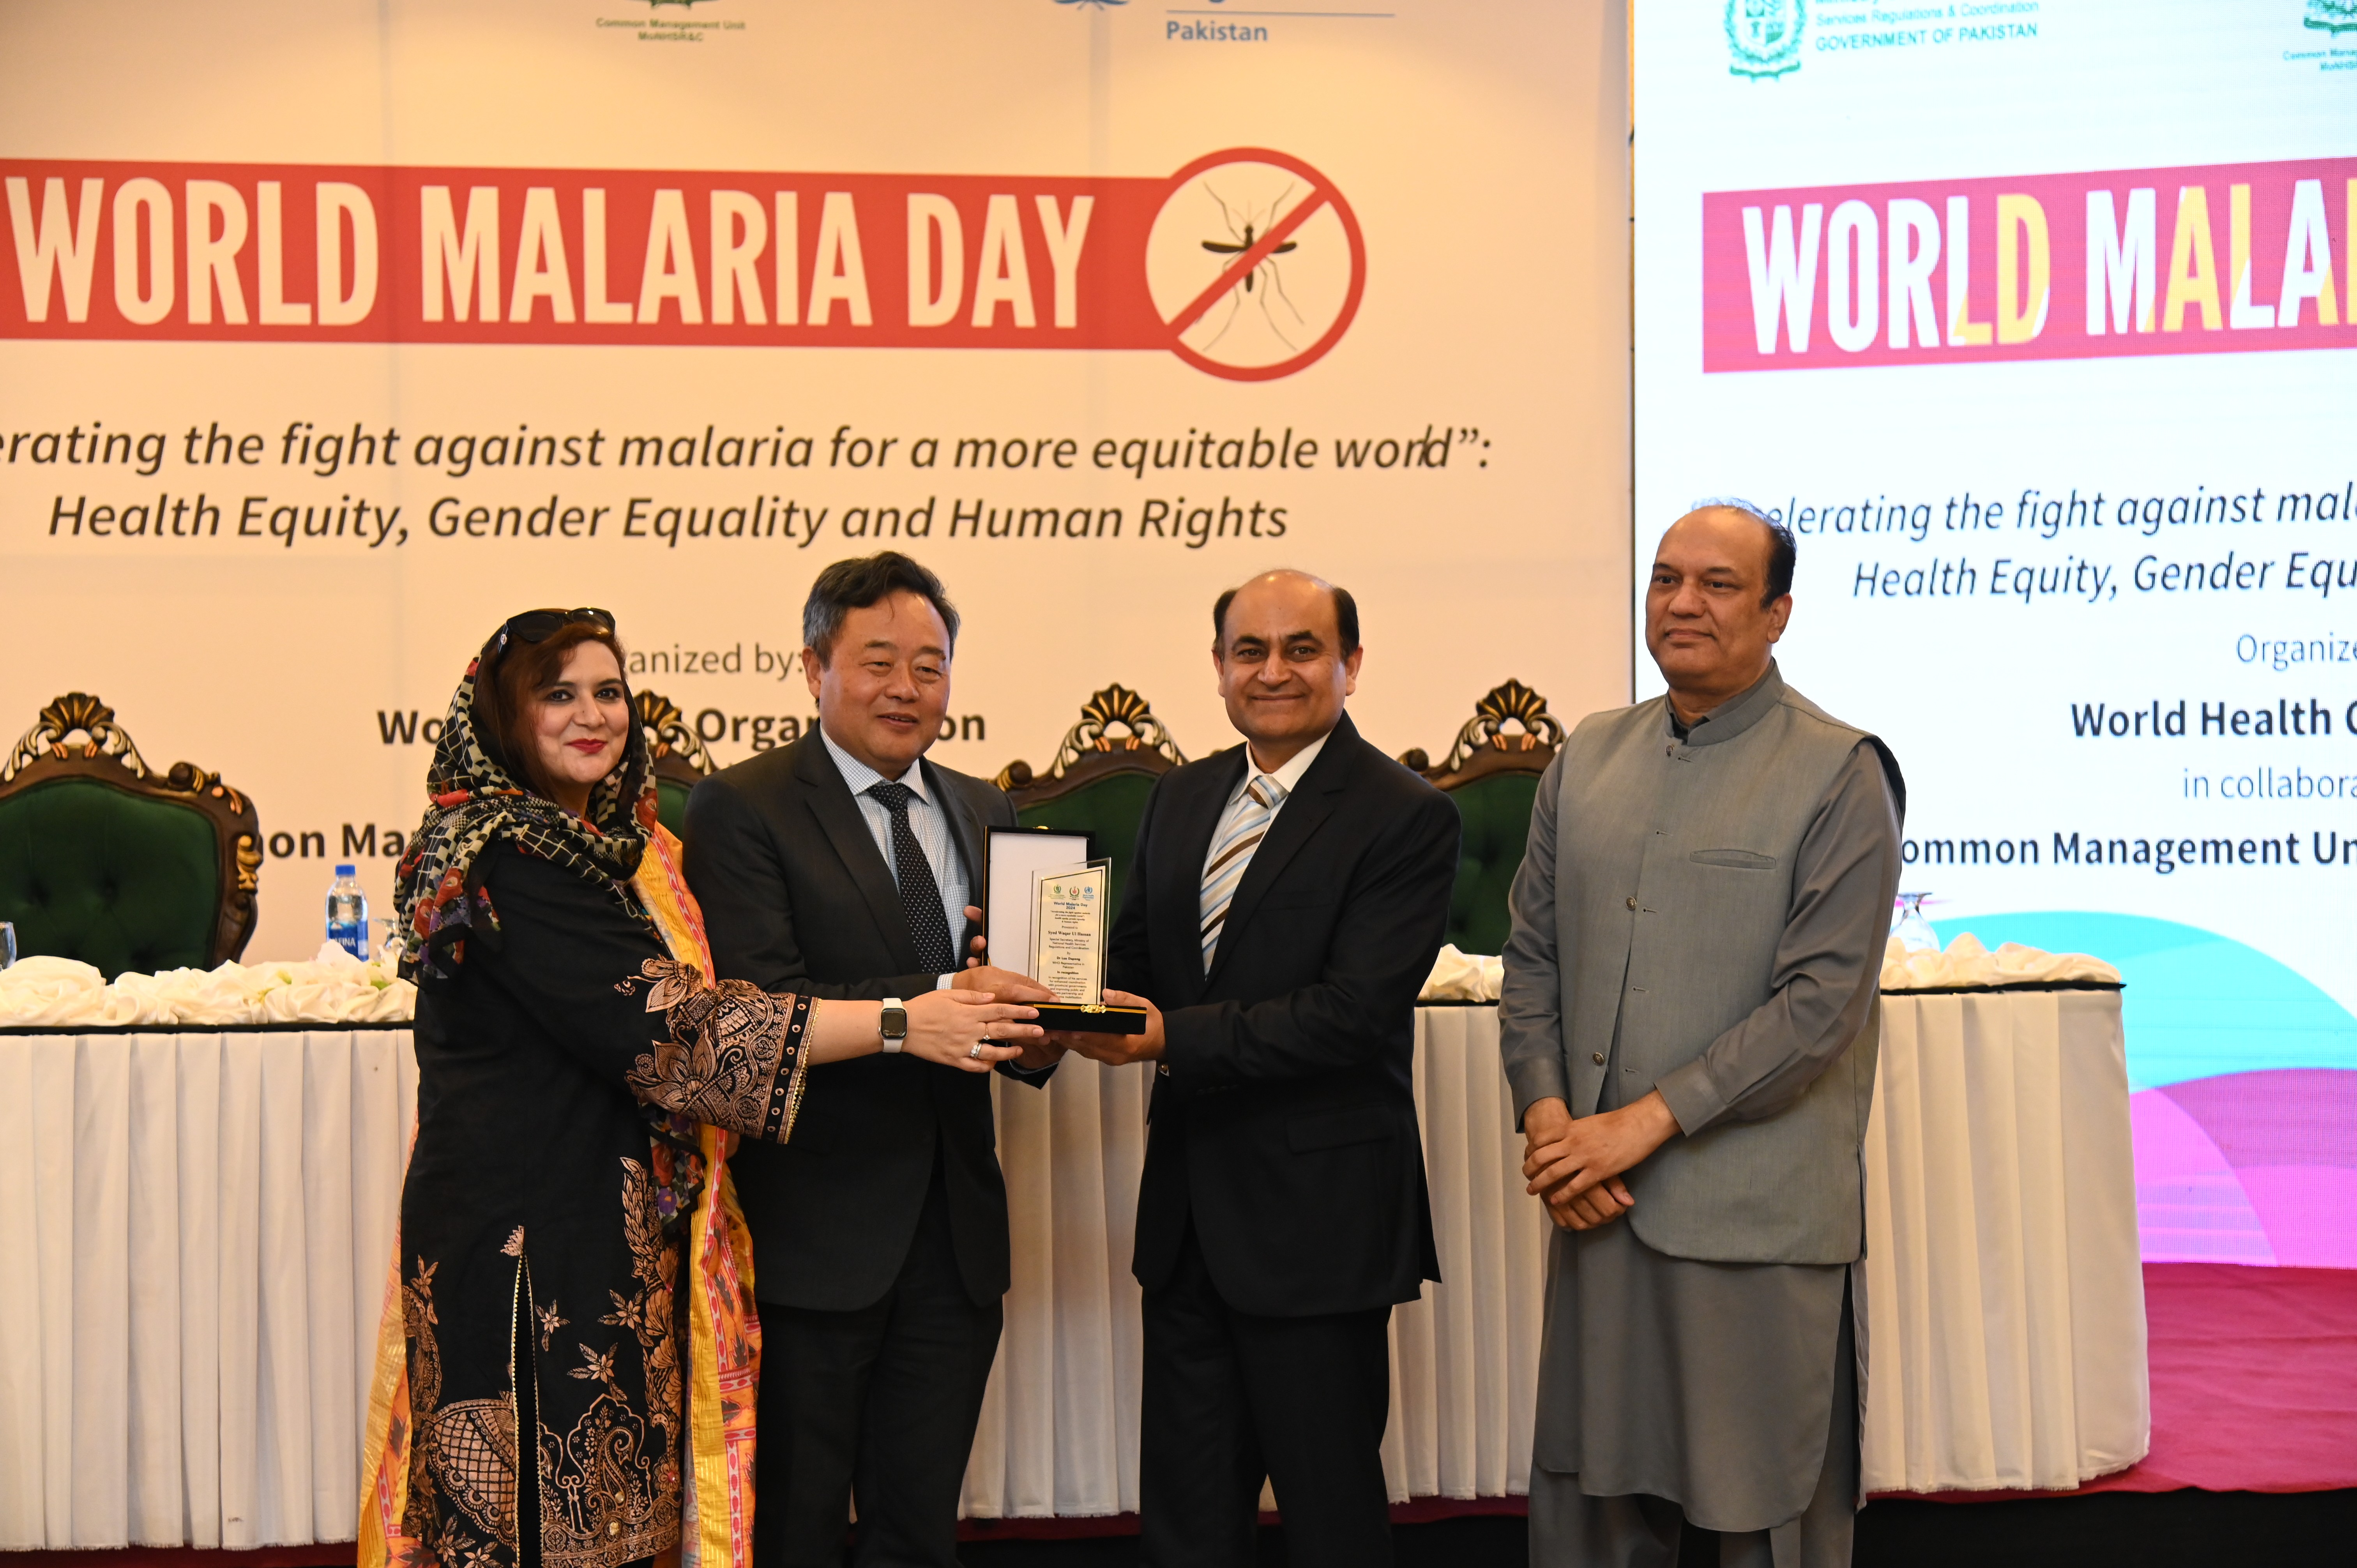 The shield distribution at the event of World Malaria Day 2029